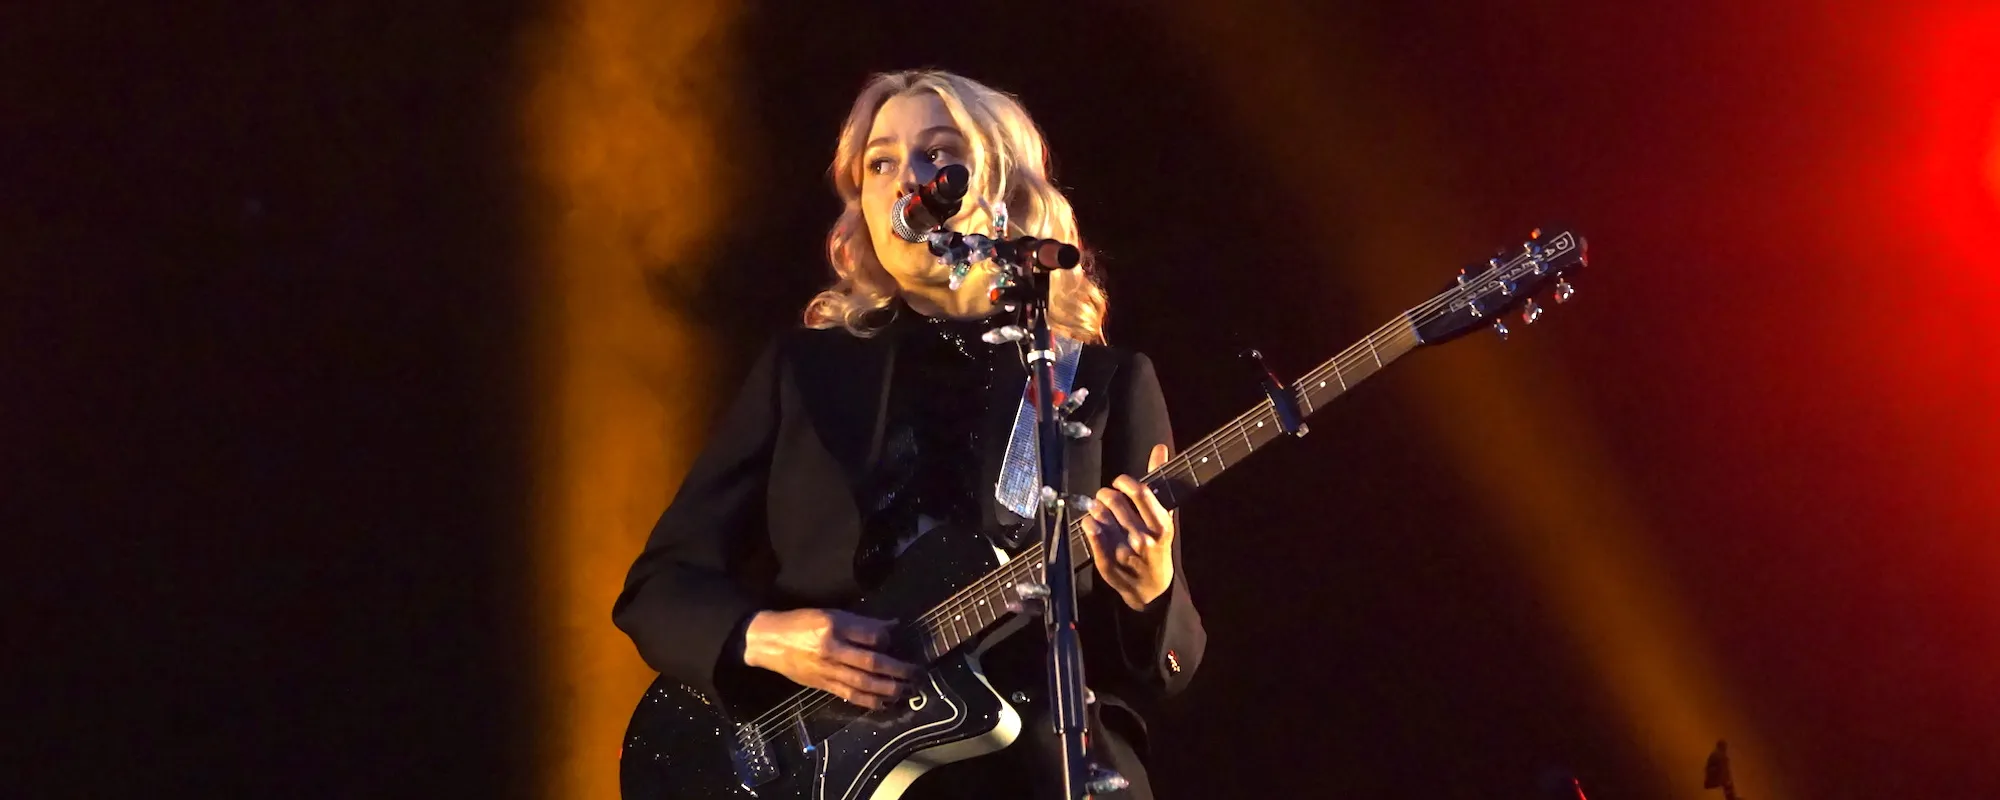 Producer Suing Phoebe Bridgers Shares Personal Texts with Artist in $3.8 Million Defamation Lawsuit